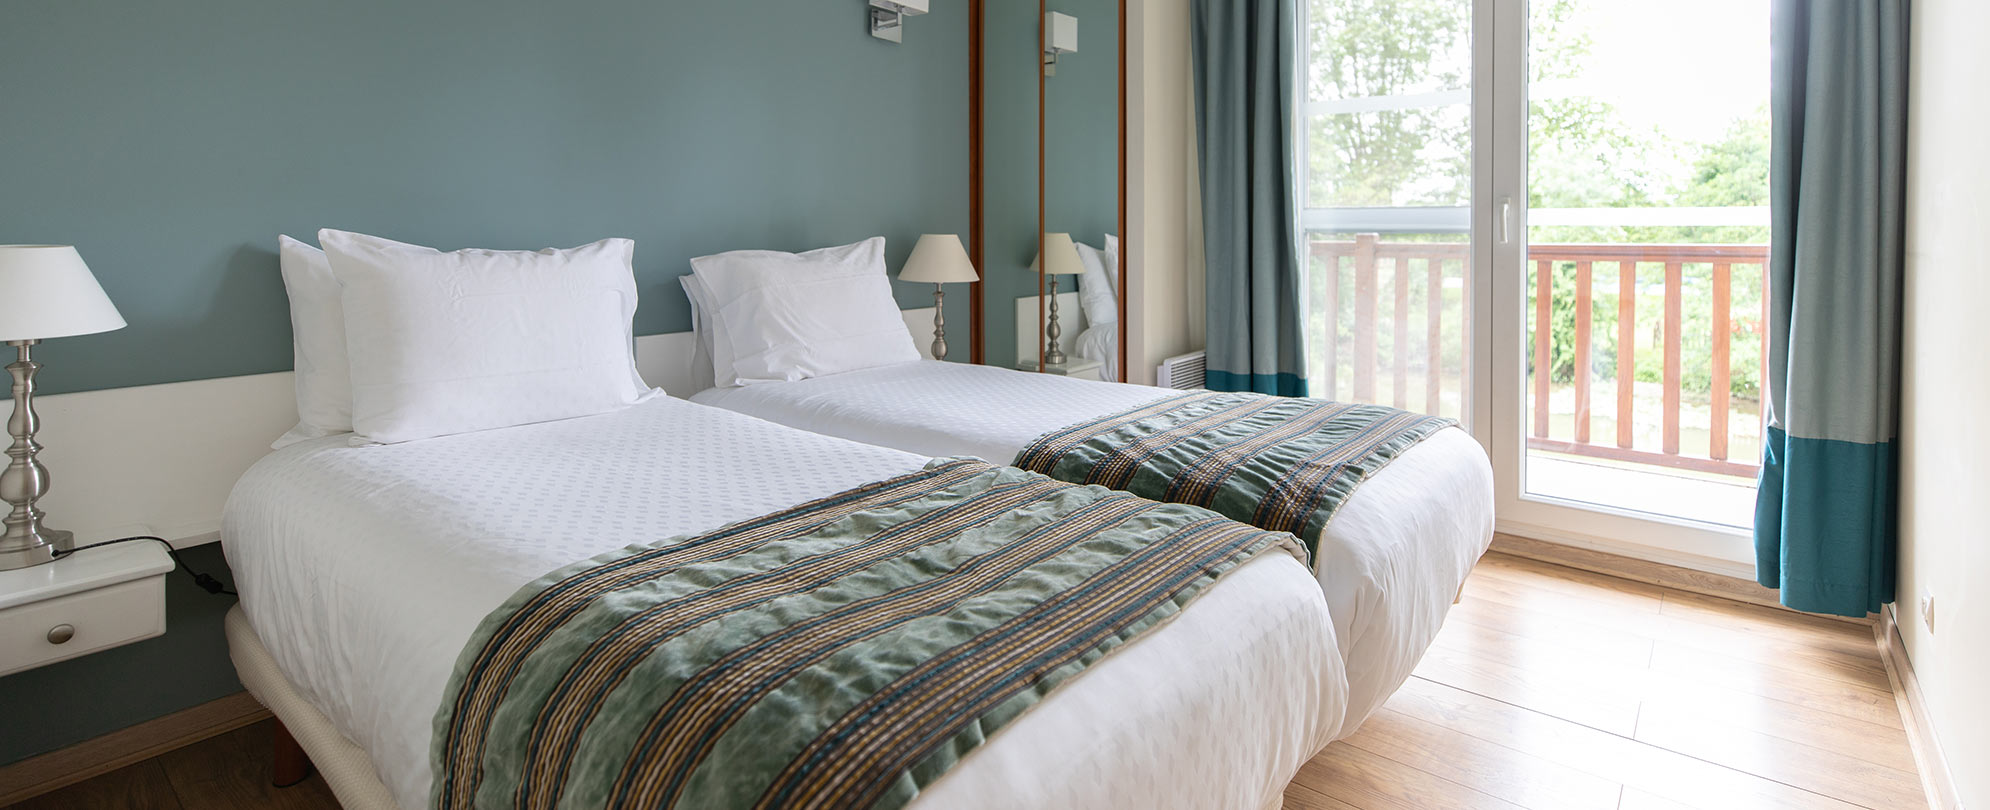 Double twin-sized beds in the second bedroom of a 2-bedroom suite at Club Wyndham Normandy.